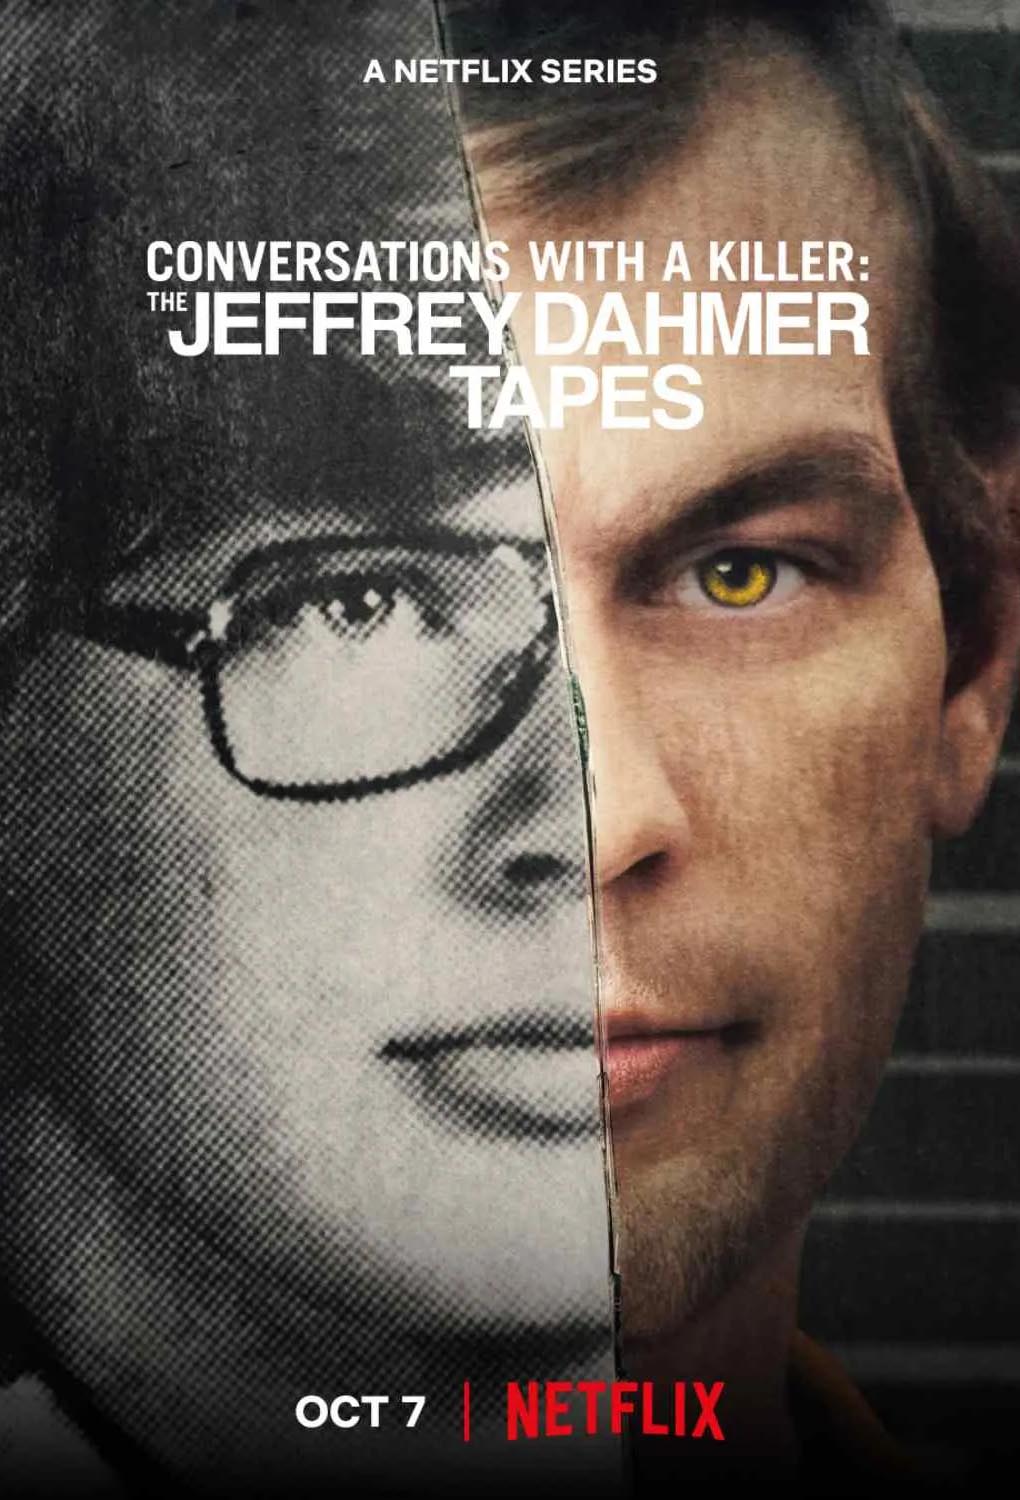 Conversations with a Killer: The Jeffrey Dahmer Tapes Season 1 Episode 1